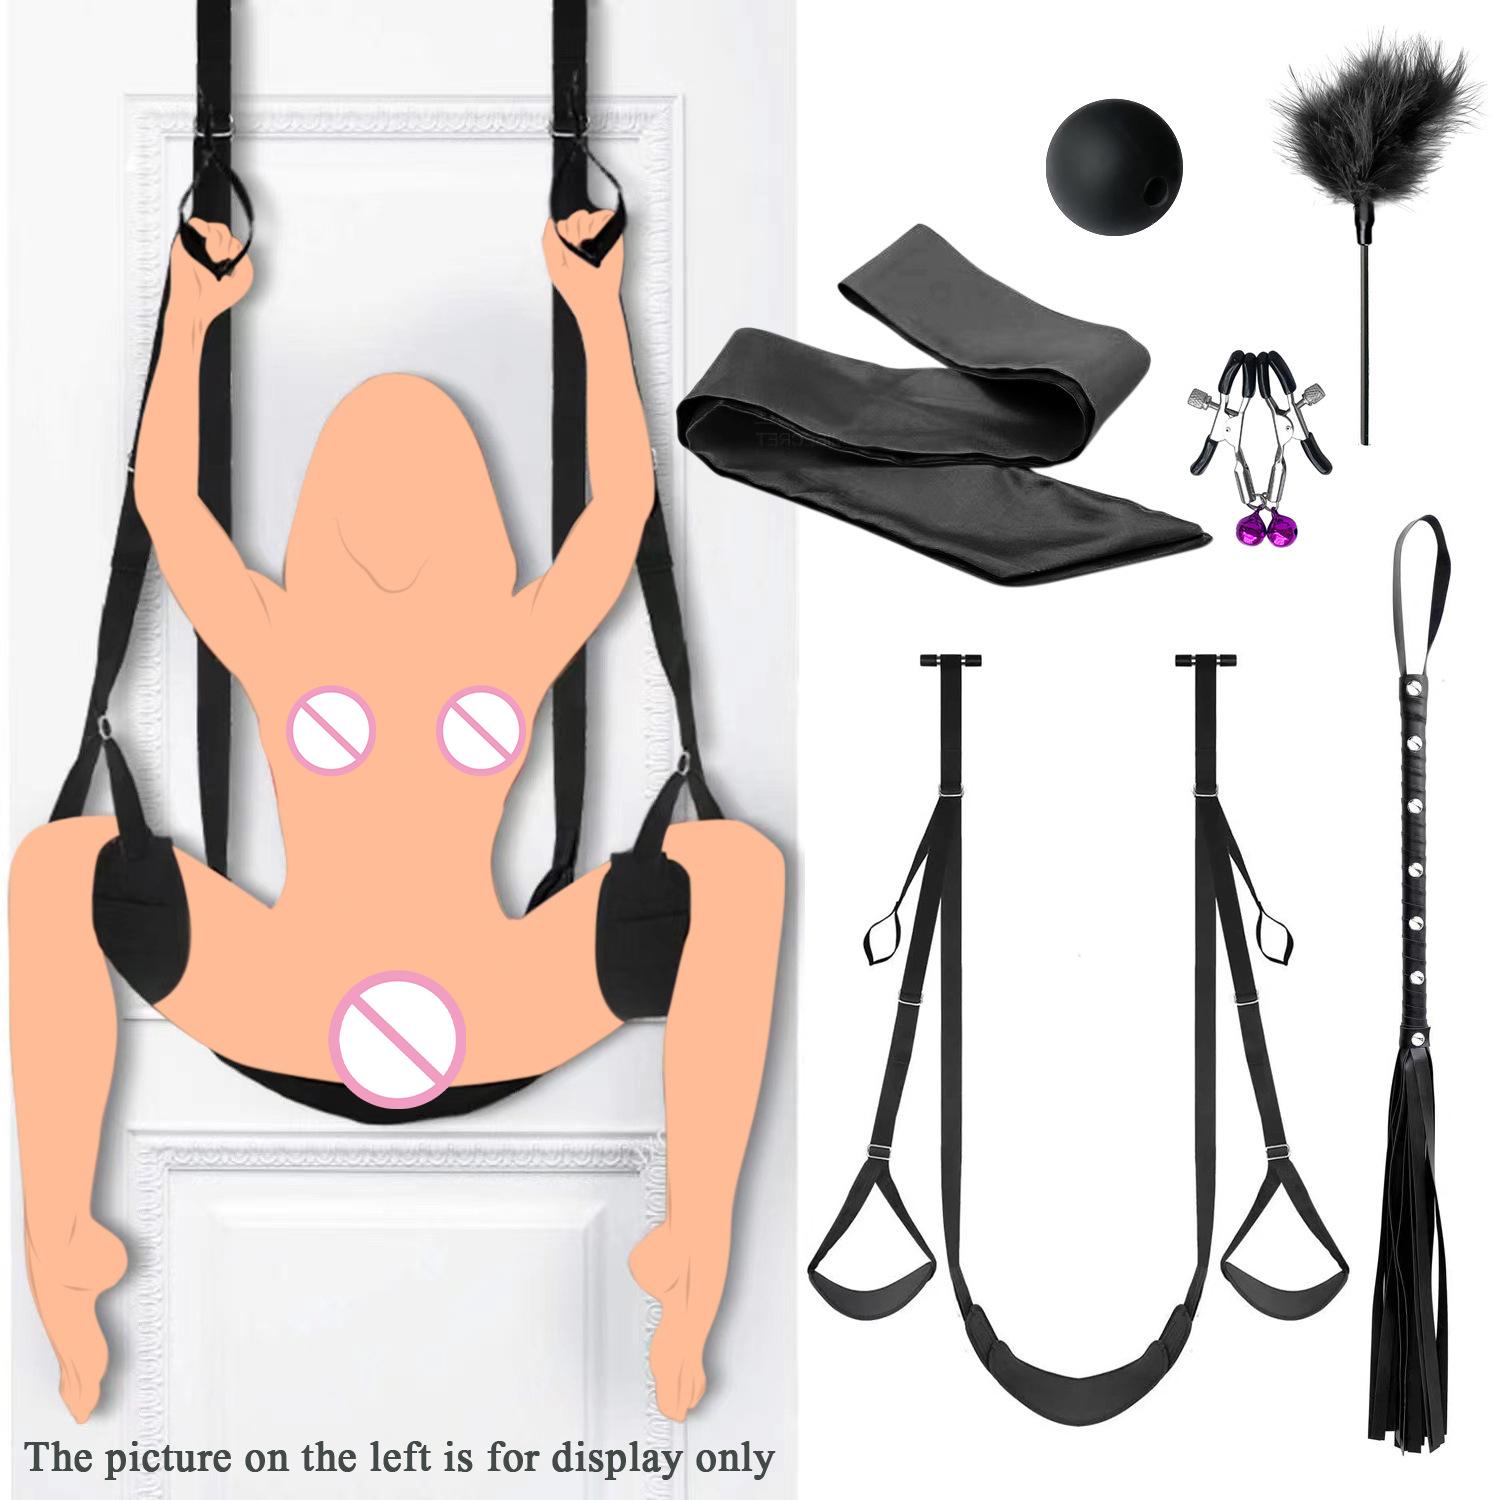 Double Bondage Set Sm Thigh Restraint Sling Legs Binding Adult Sex Products Slave Fetish Toy Sex Swing For Women Couples